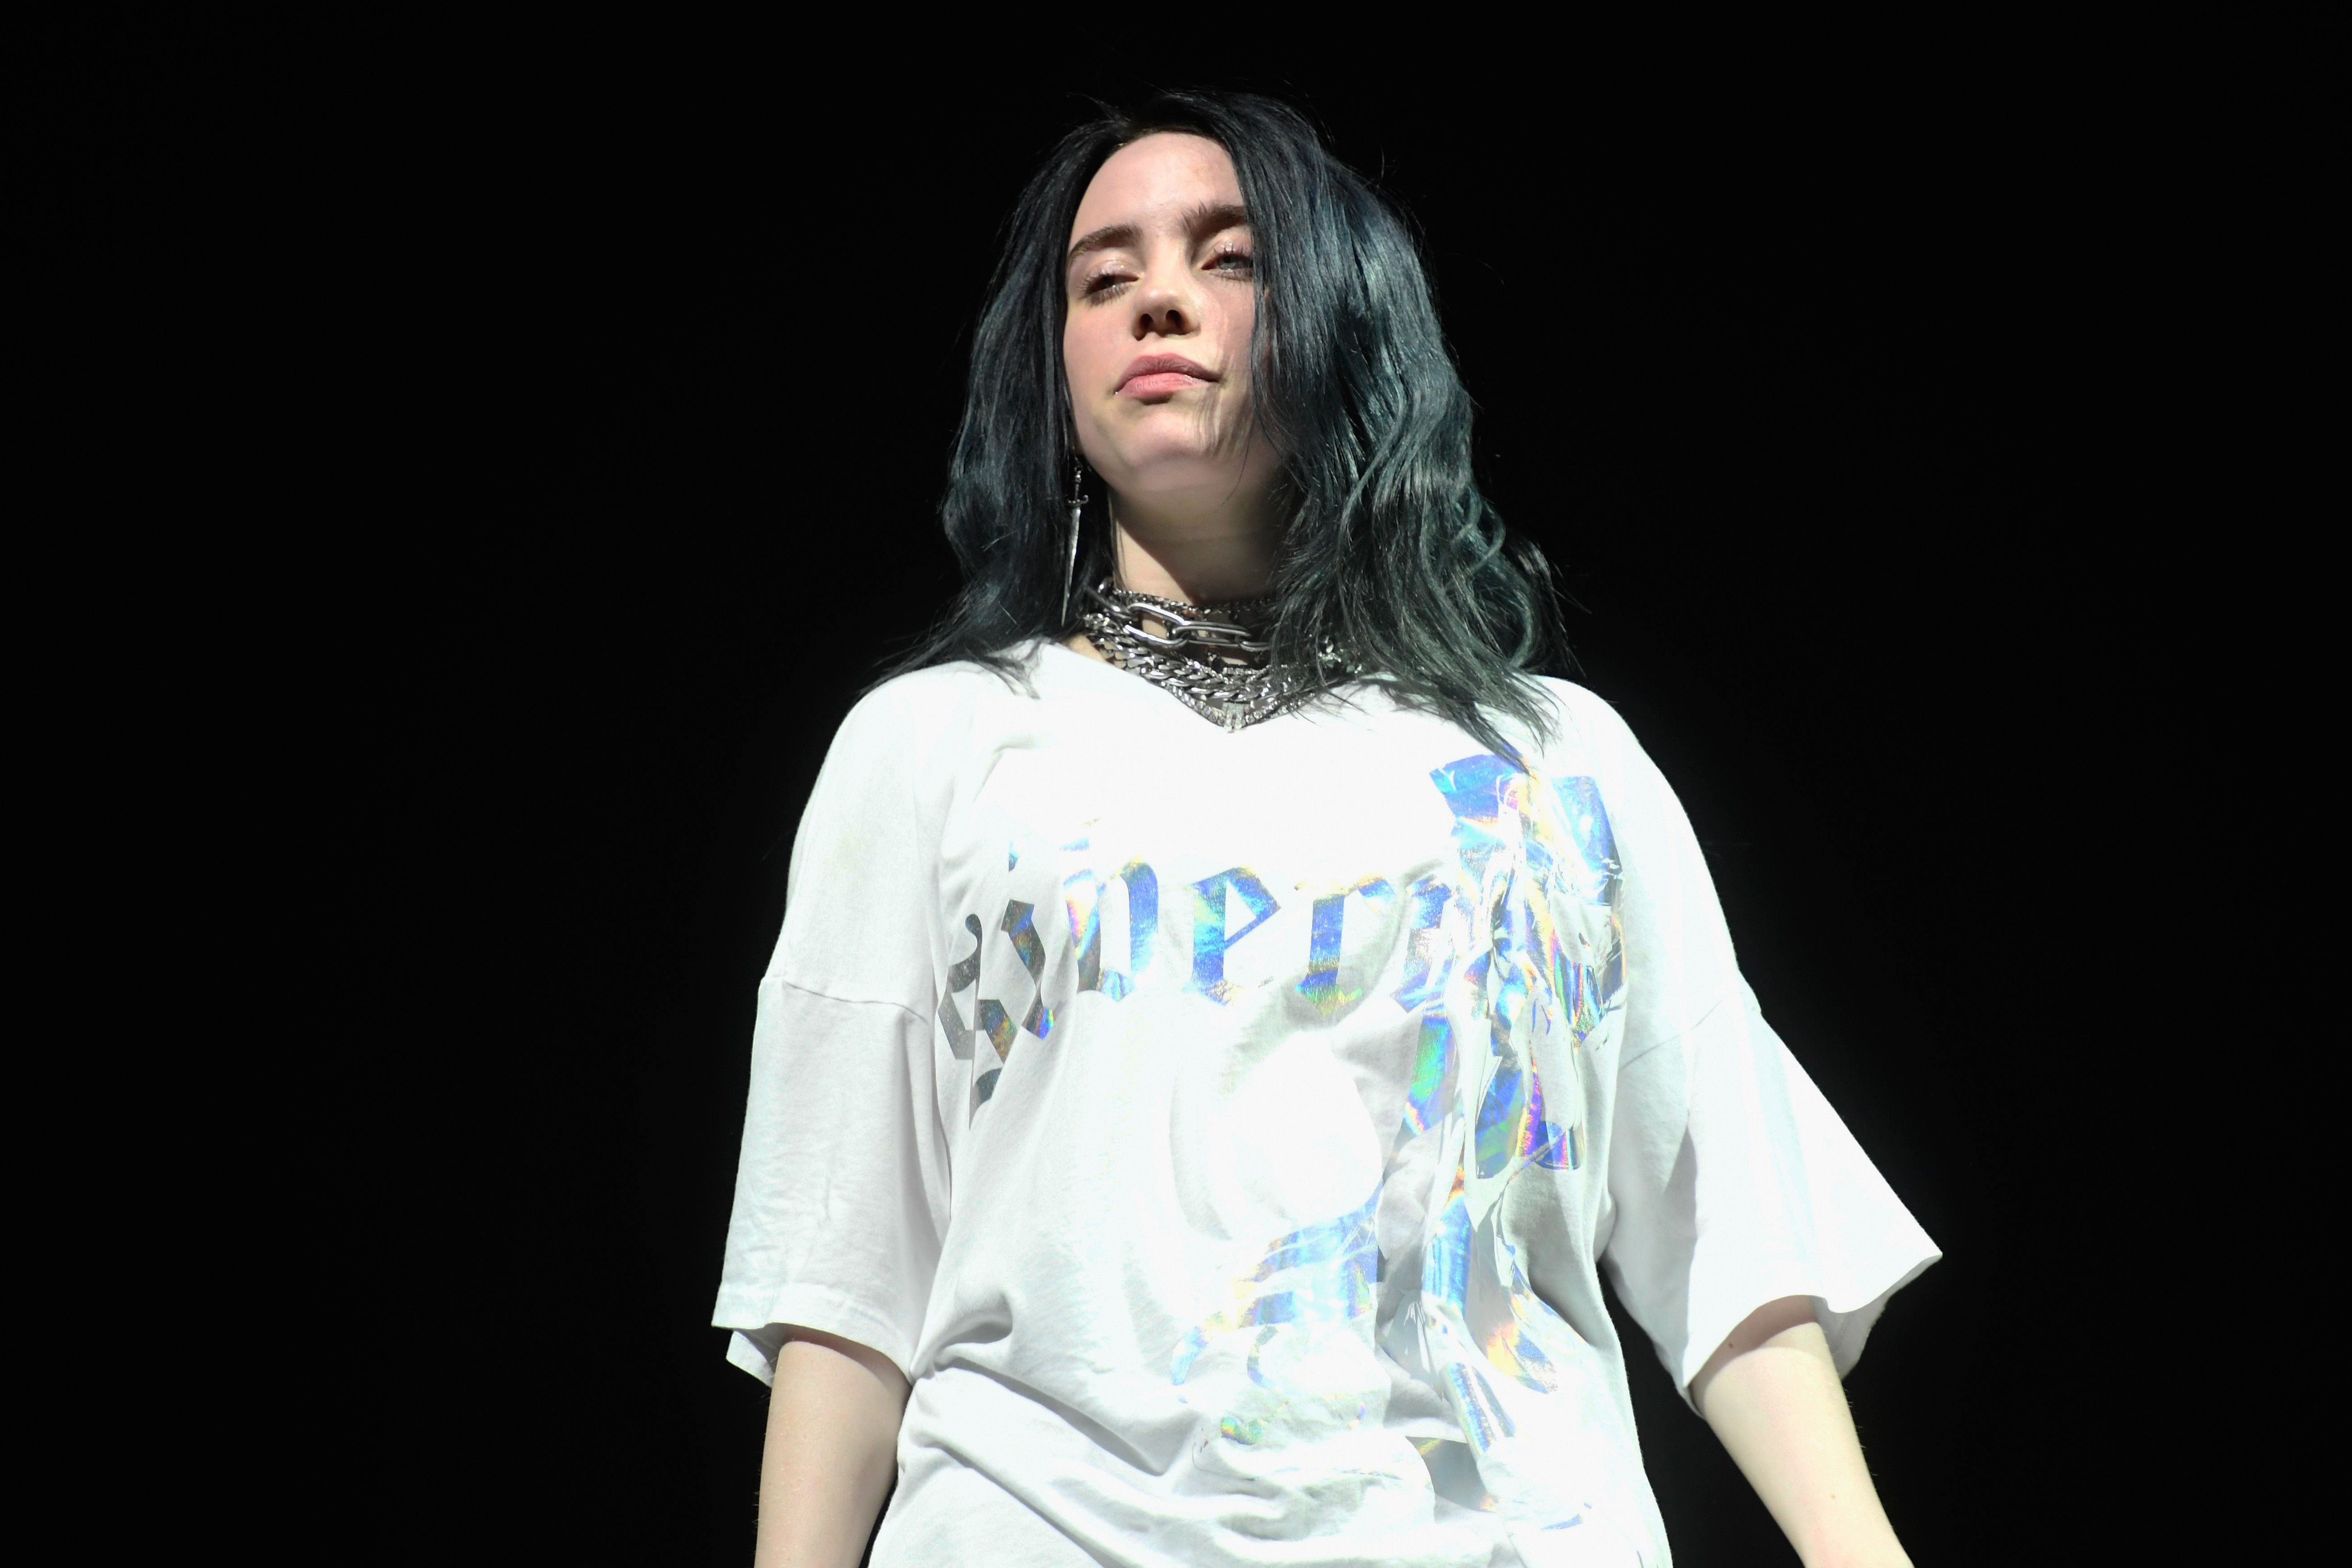 10 Facts About Billie Eilish That Will Make You Even More Obsessed With Her